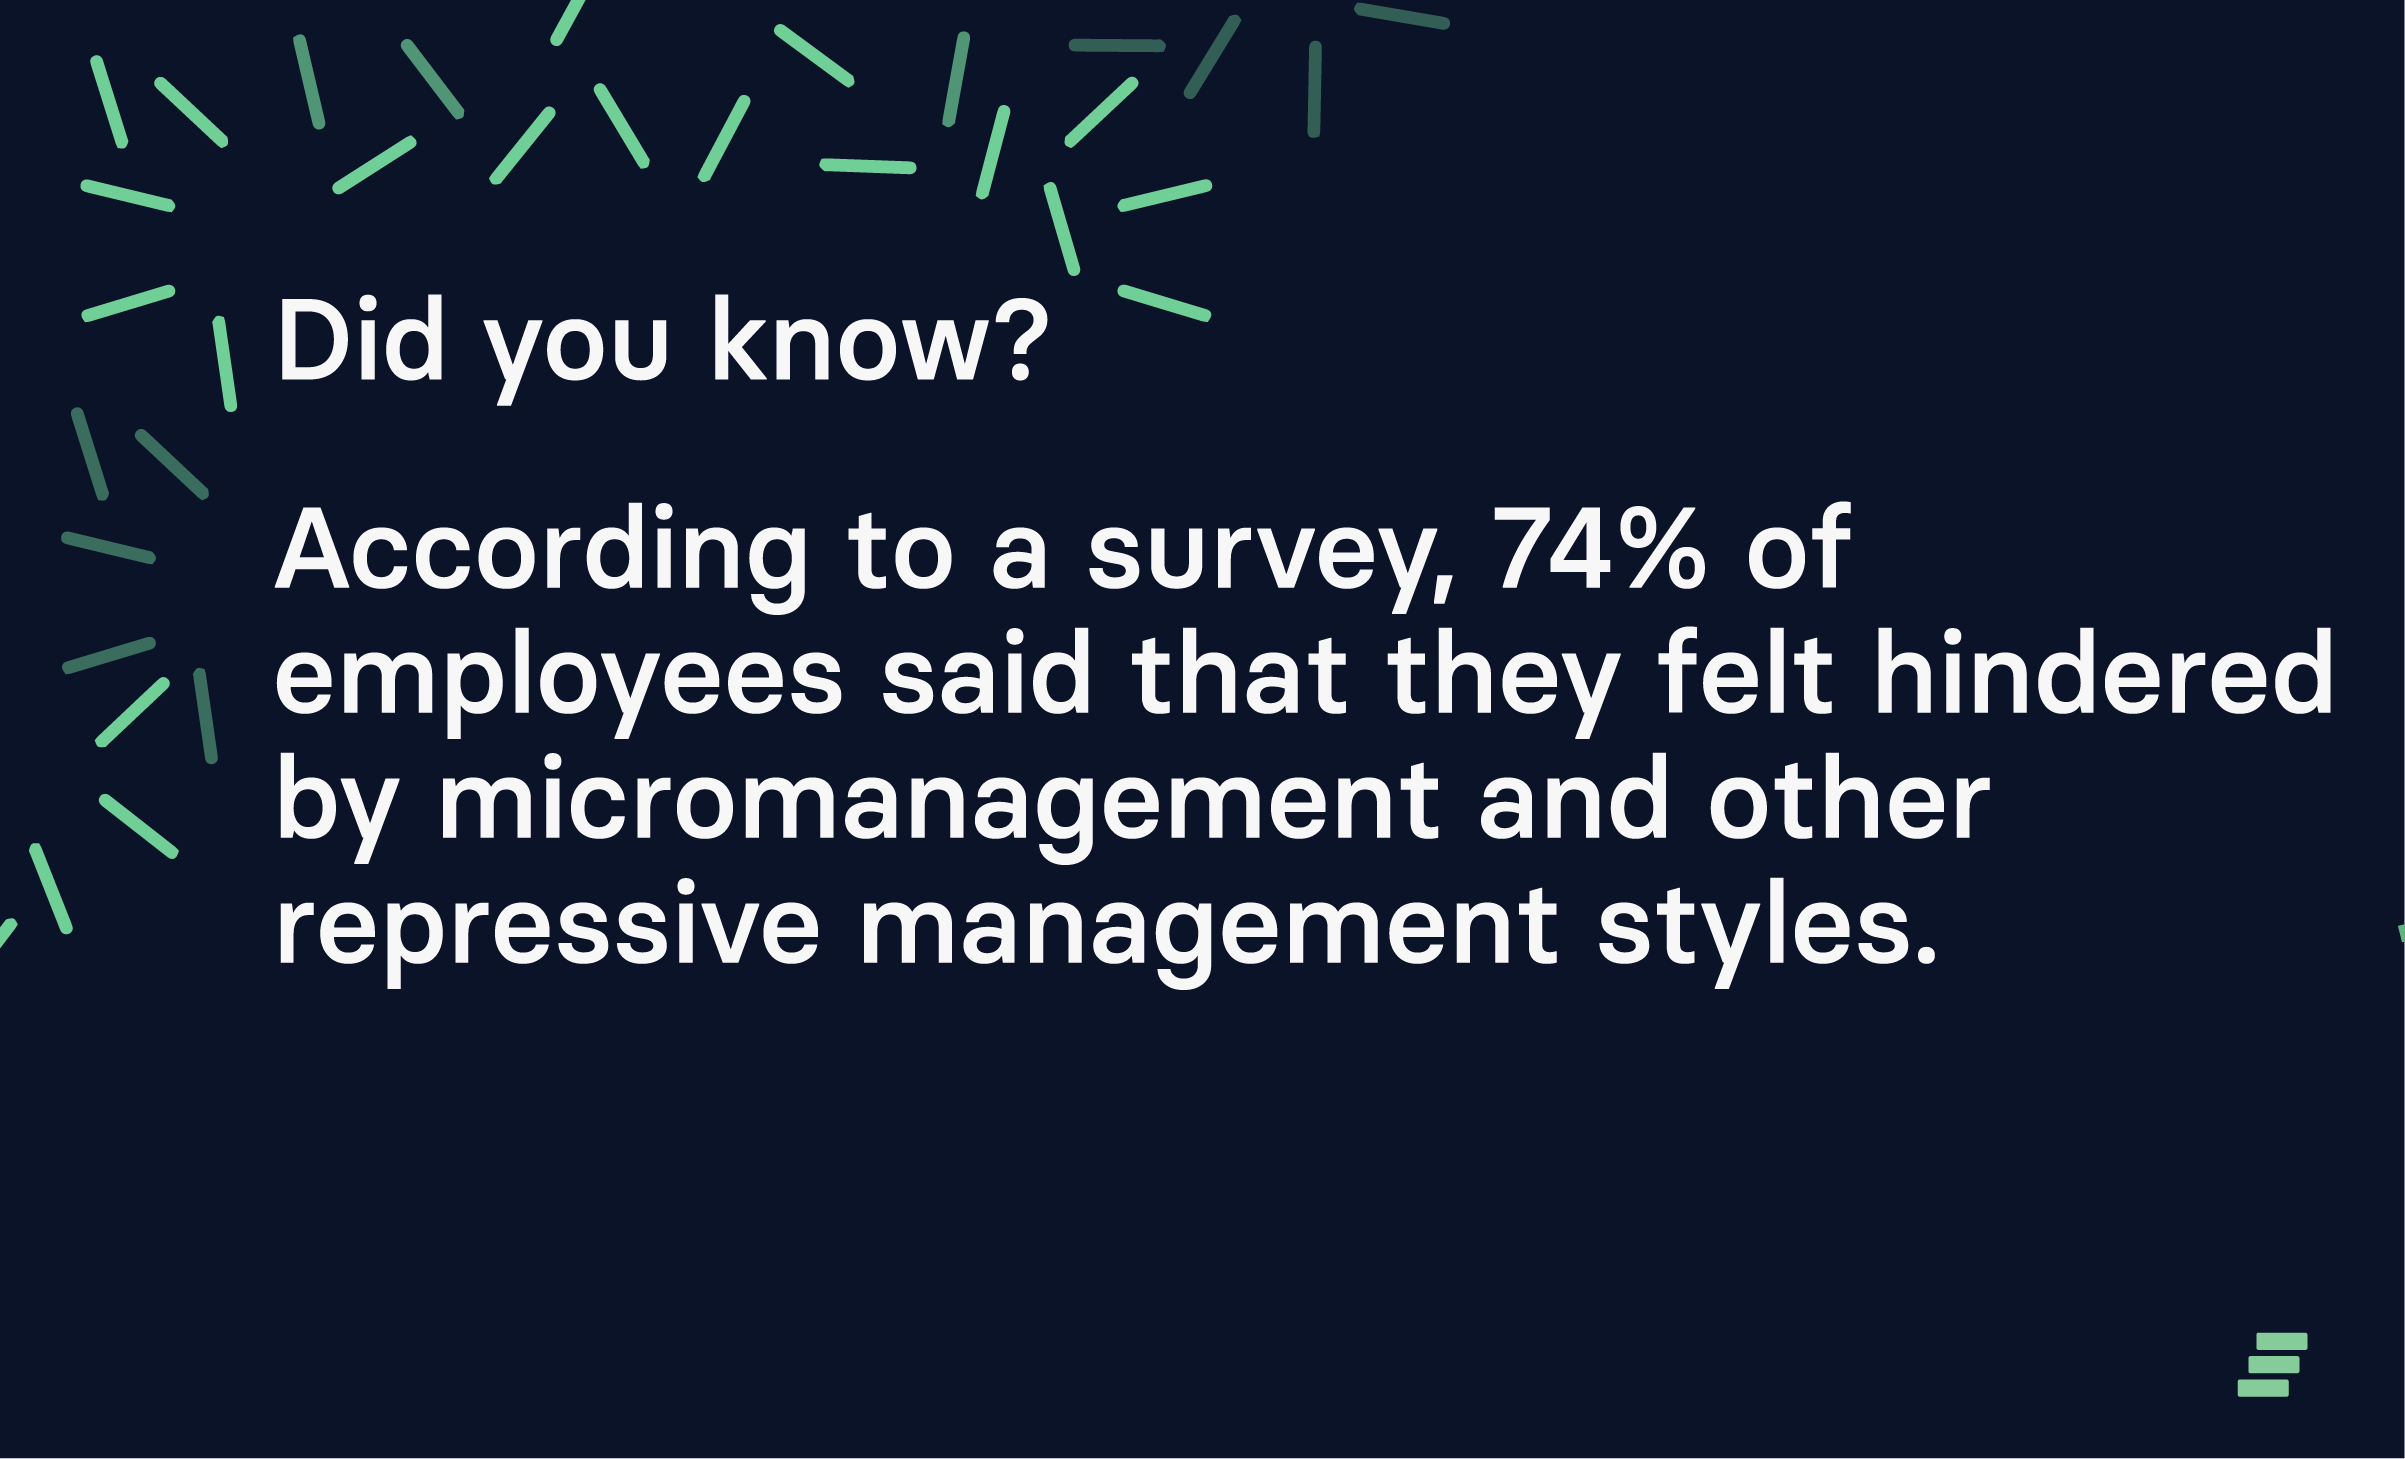 A "Did you know?" graphic about employees and repressive management styles